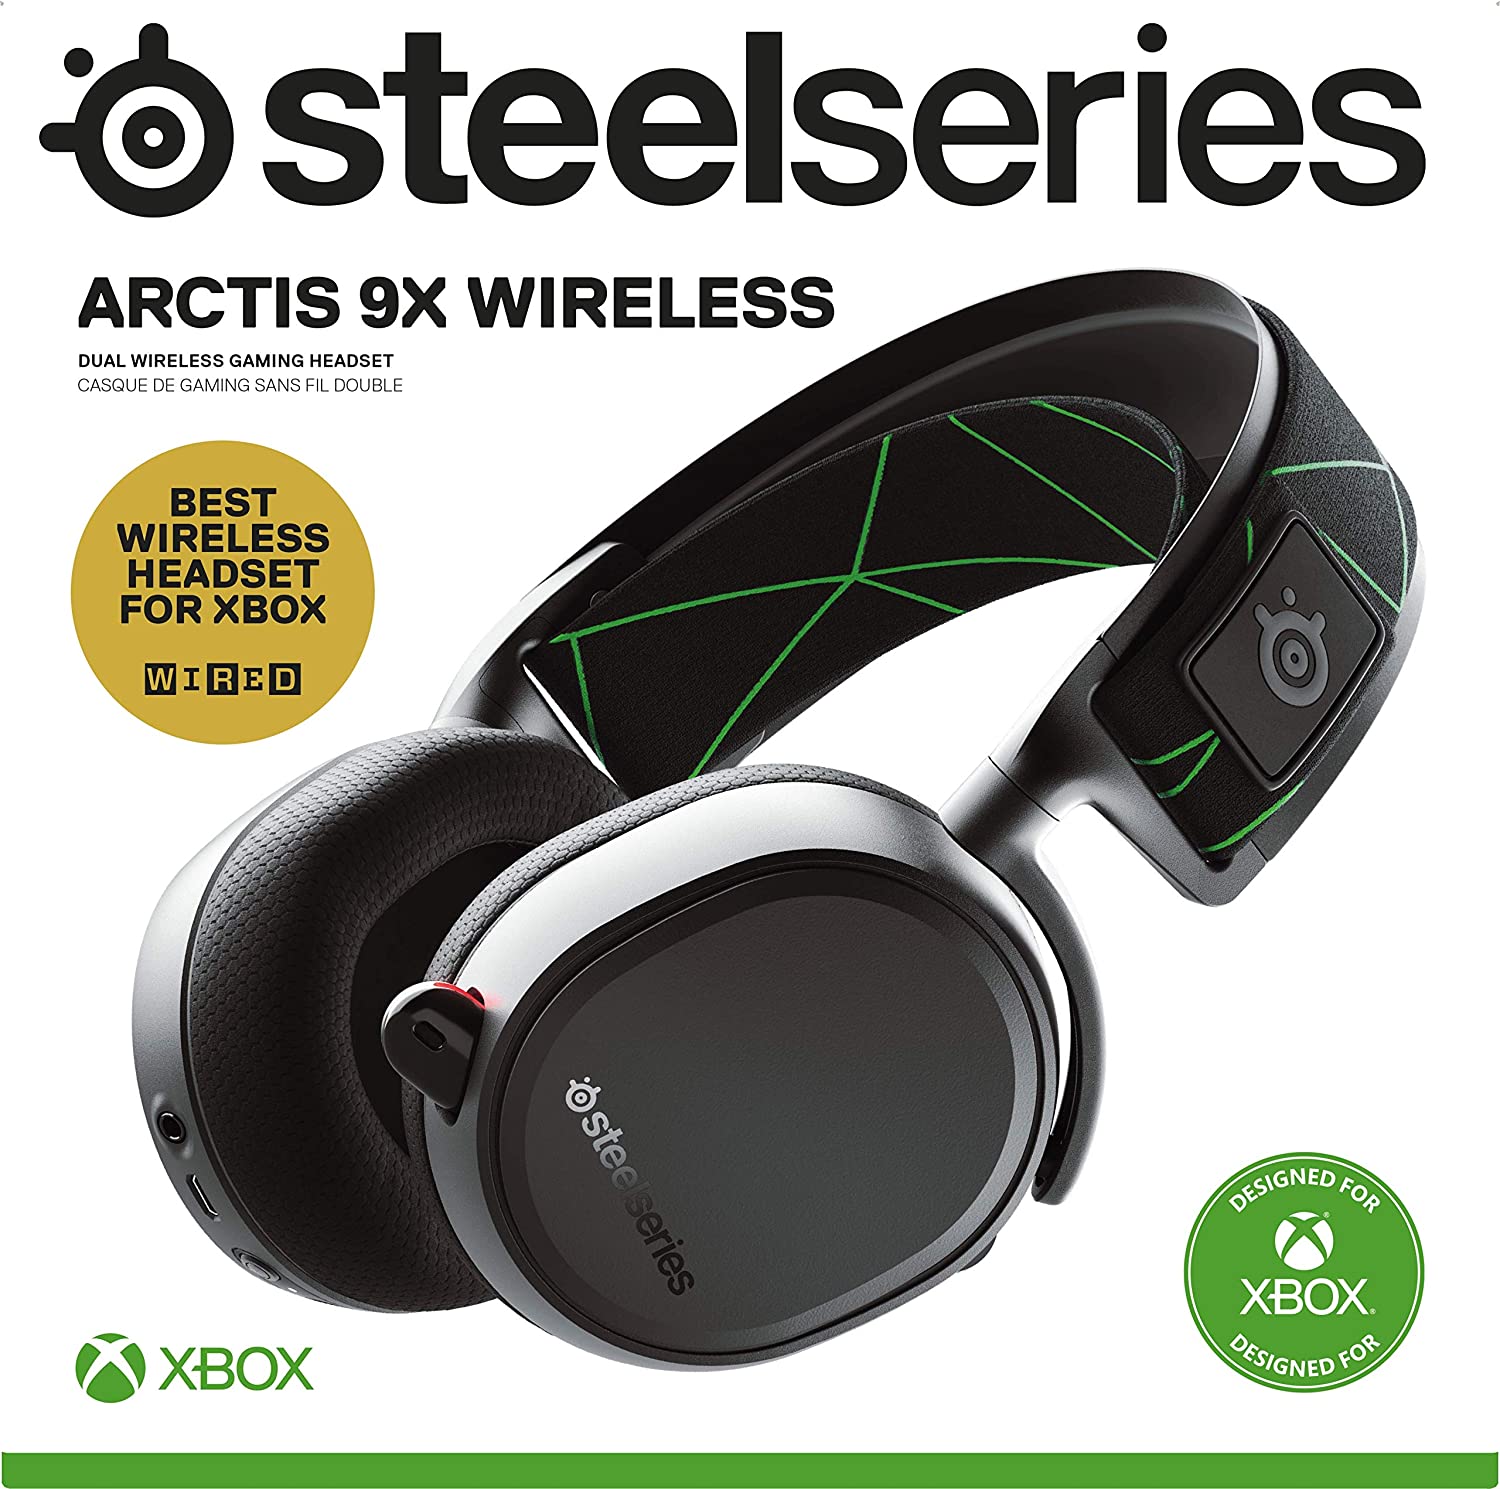 SteelSeries Arctis 9X Wireless Gaming Headset for Xbox - image 7 of 15